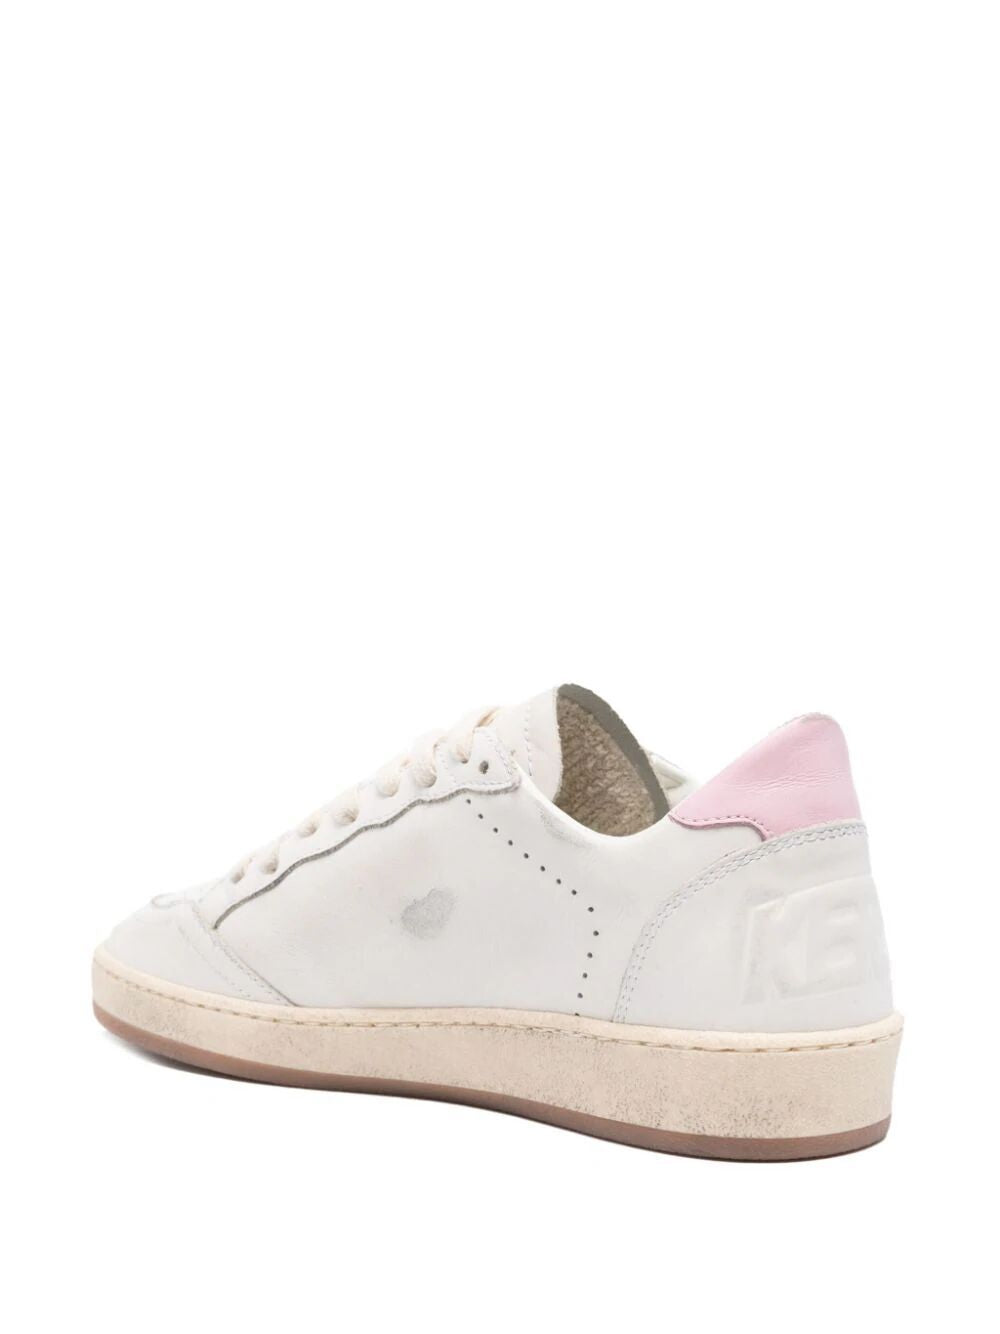 GOLDEN GOOSE Sophisticated Leather Sneakers in White and Orchid Pink for Women | SS24 Season